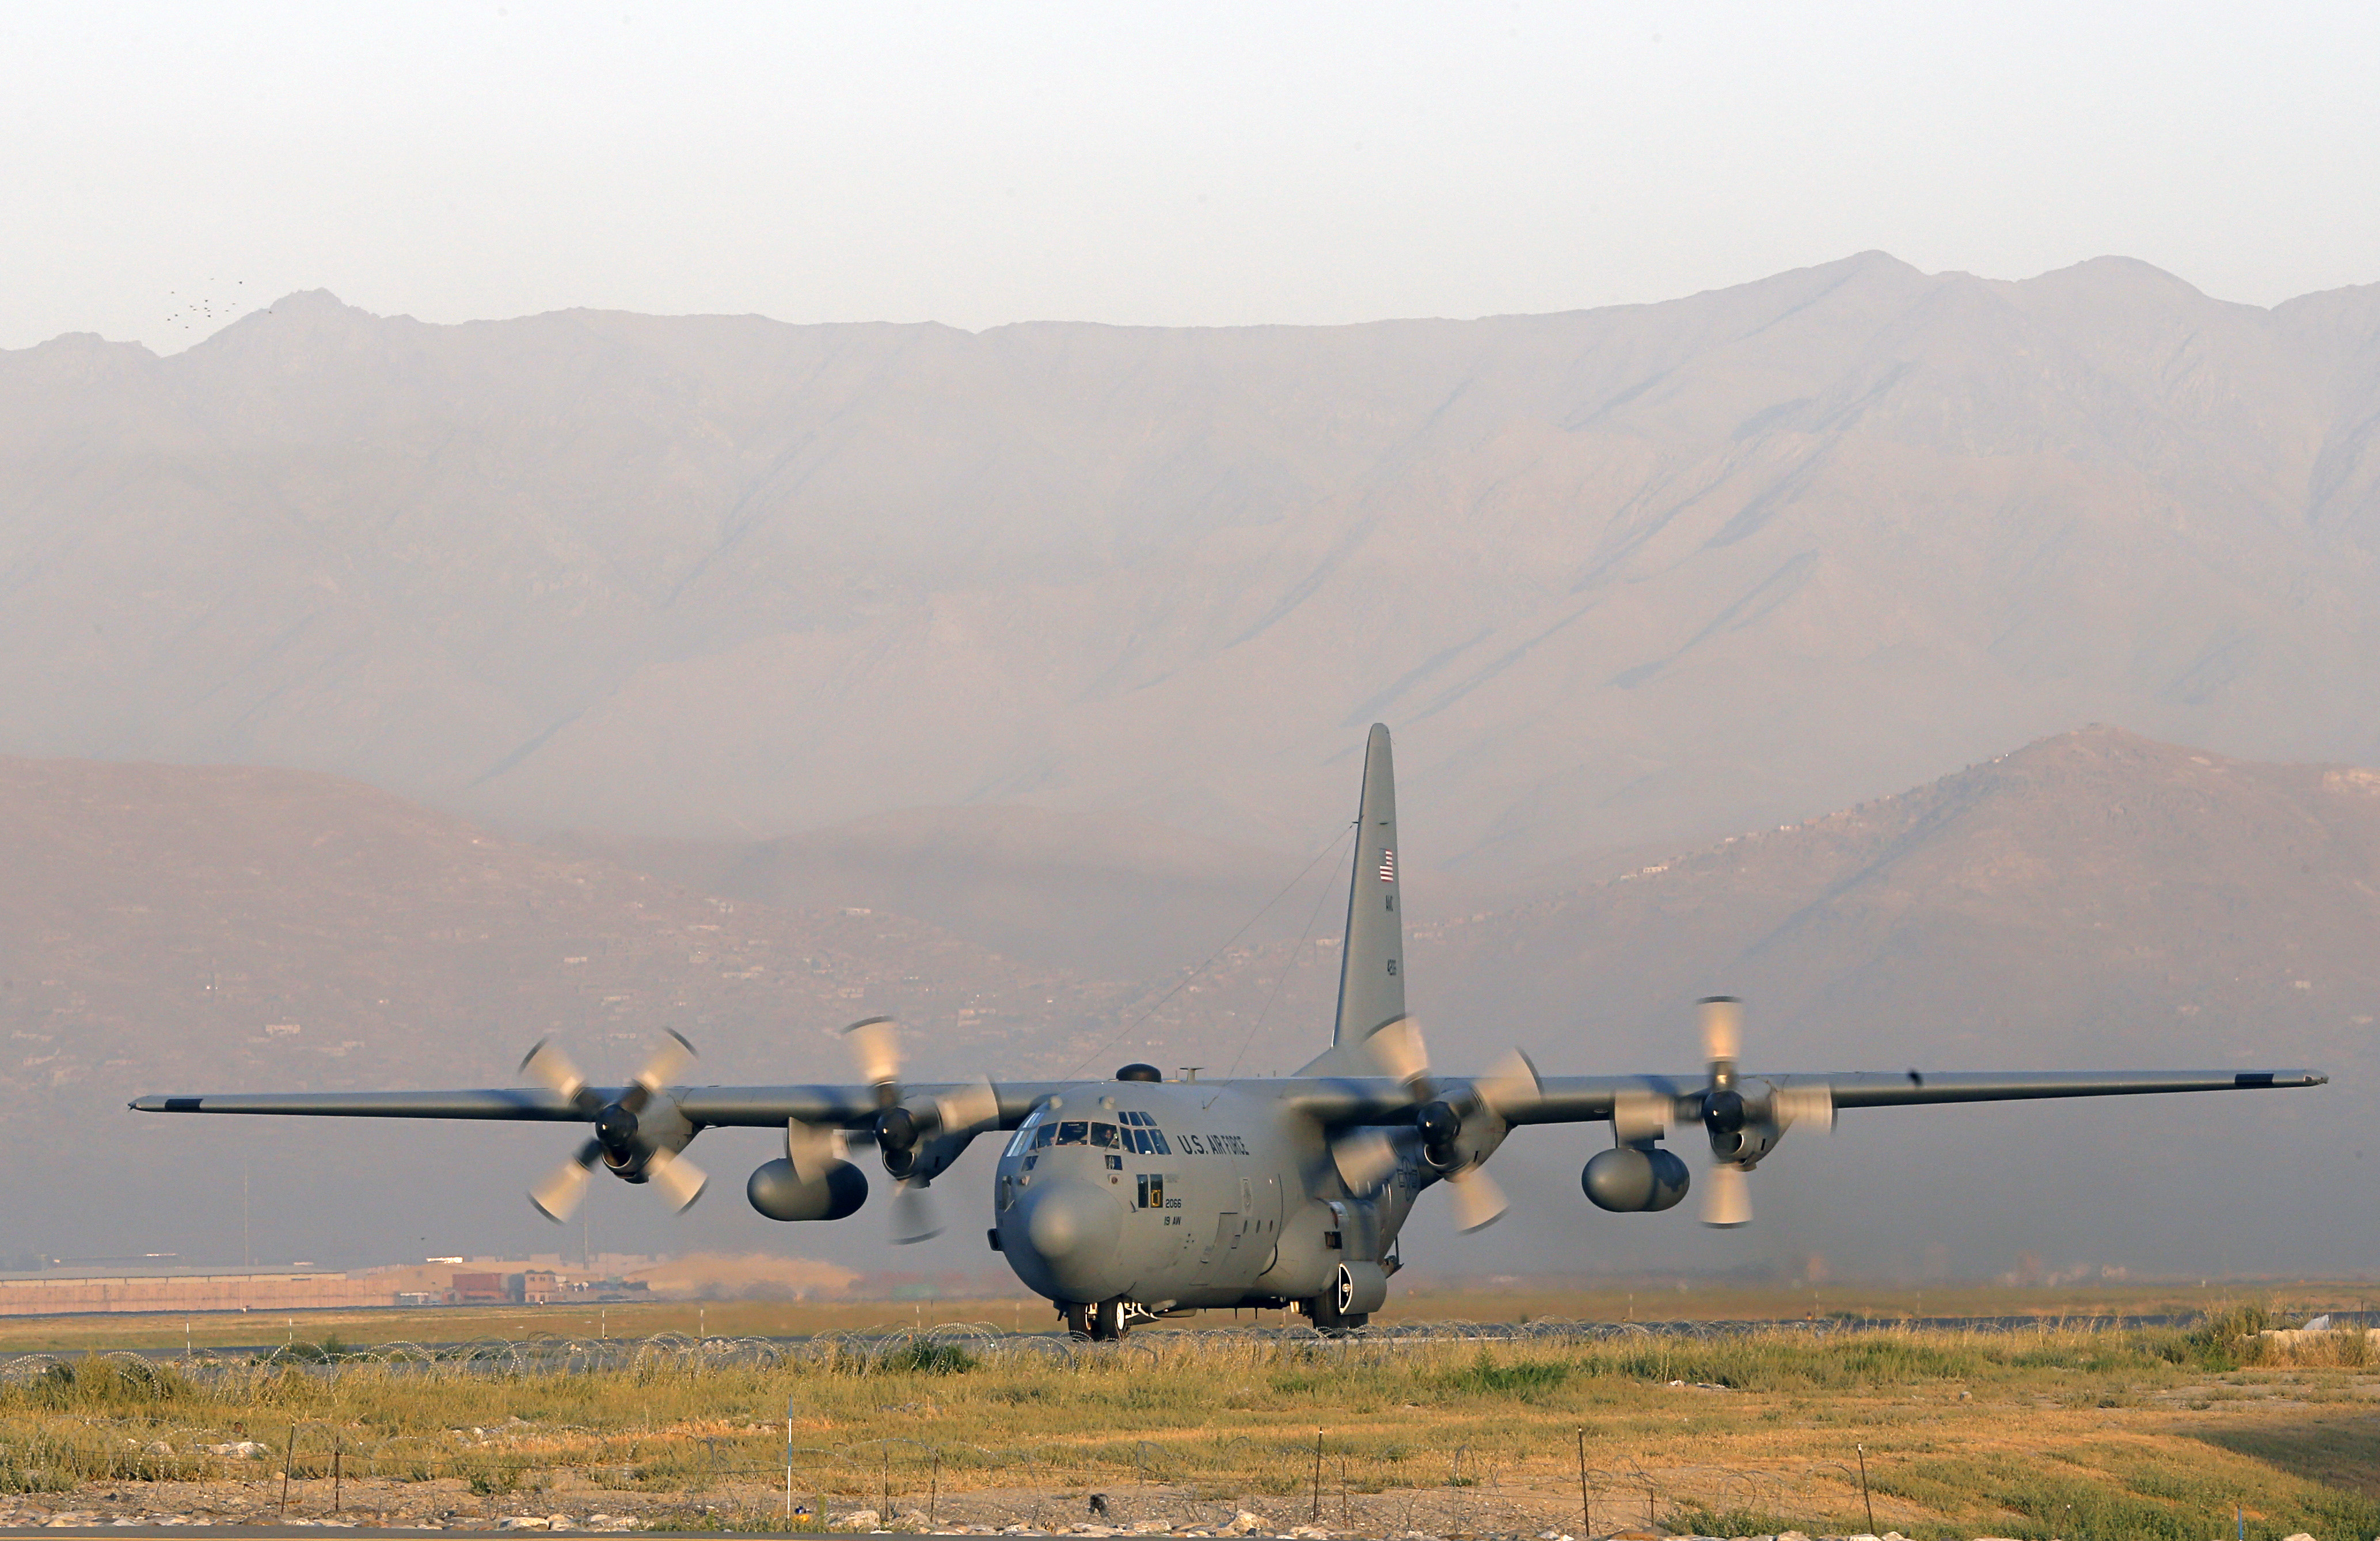 downed aircraft in afghanistan